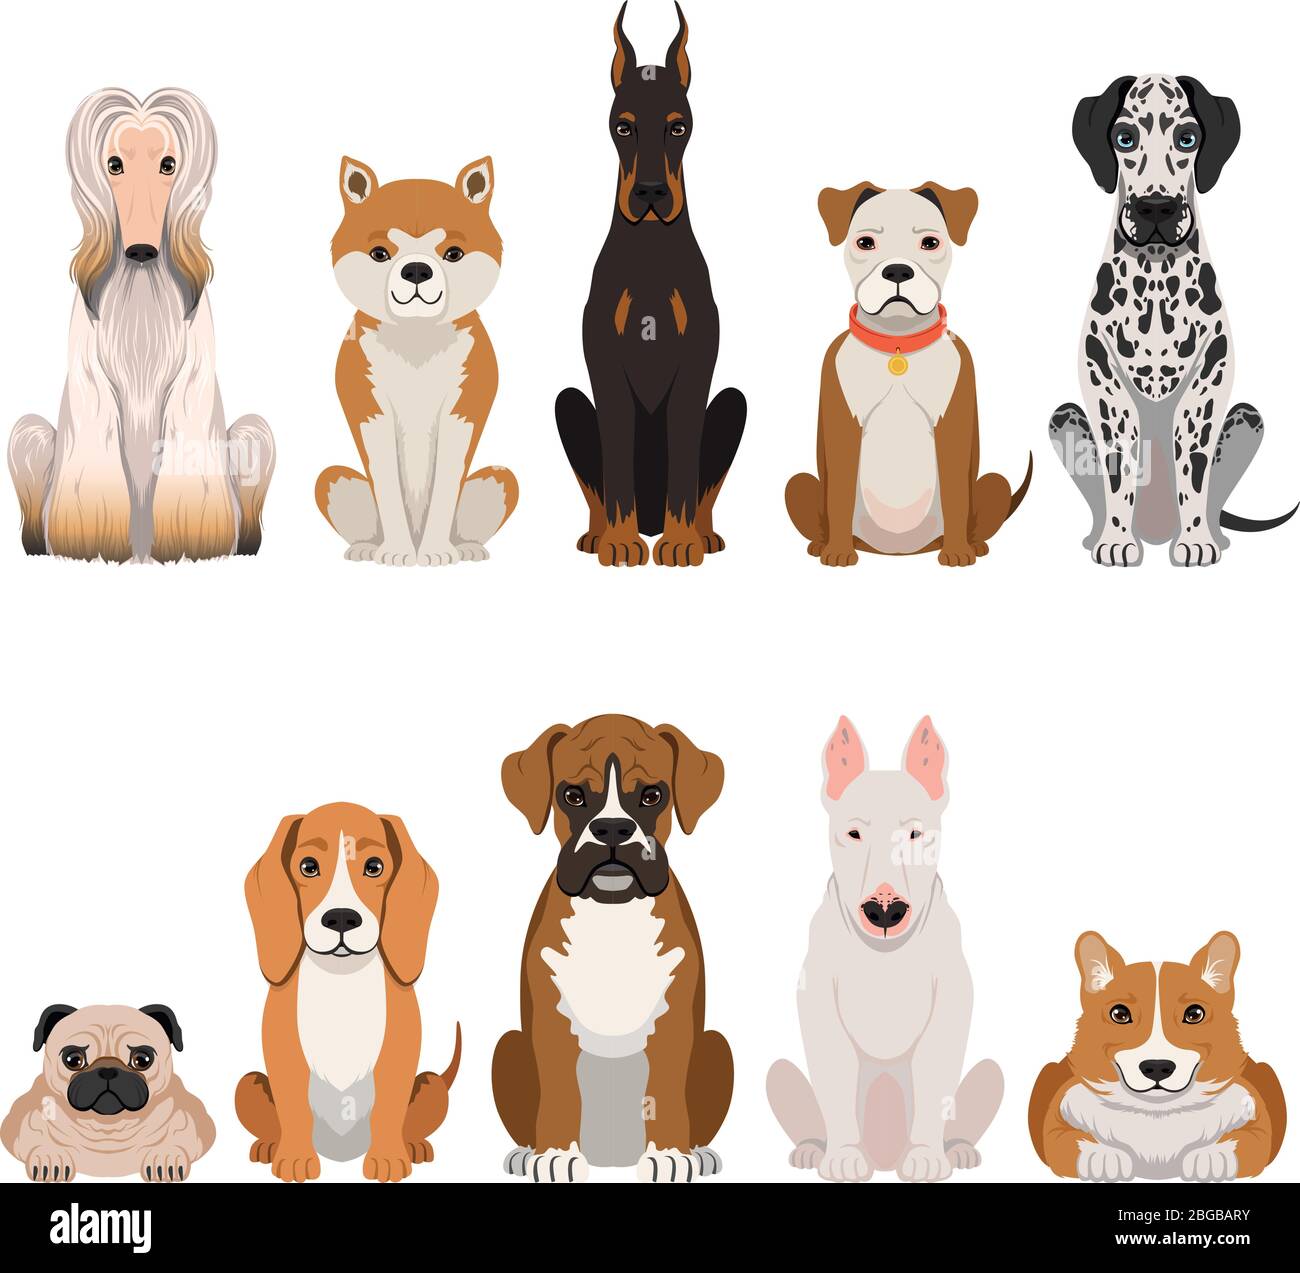 Funny dogs illustrations in cartoon style. Domestic pets Stock Vector